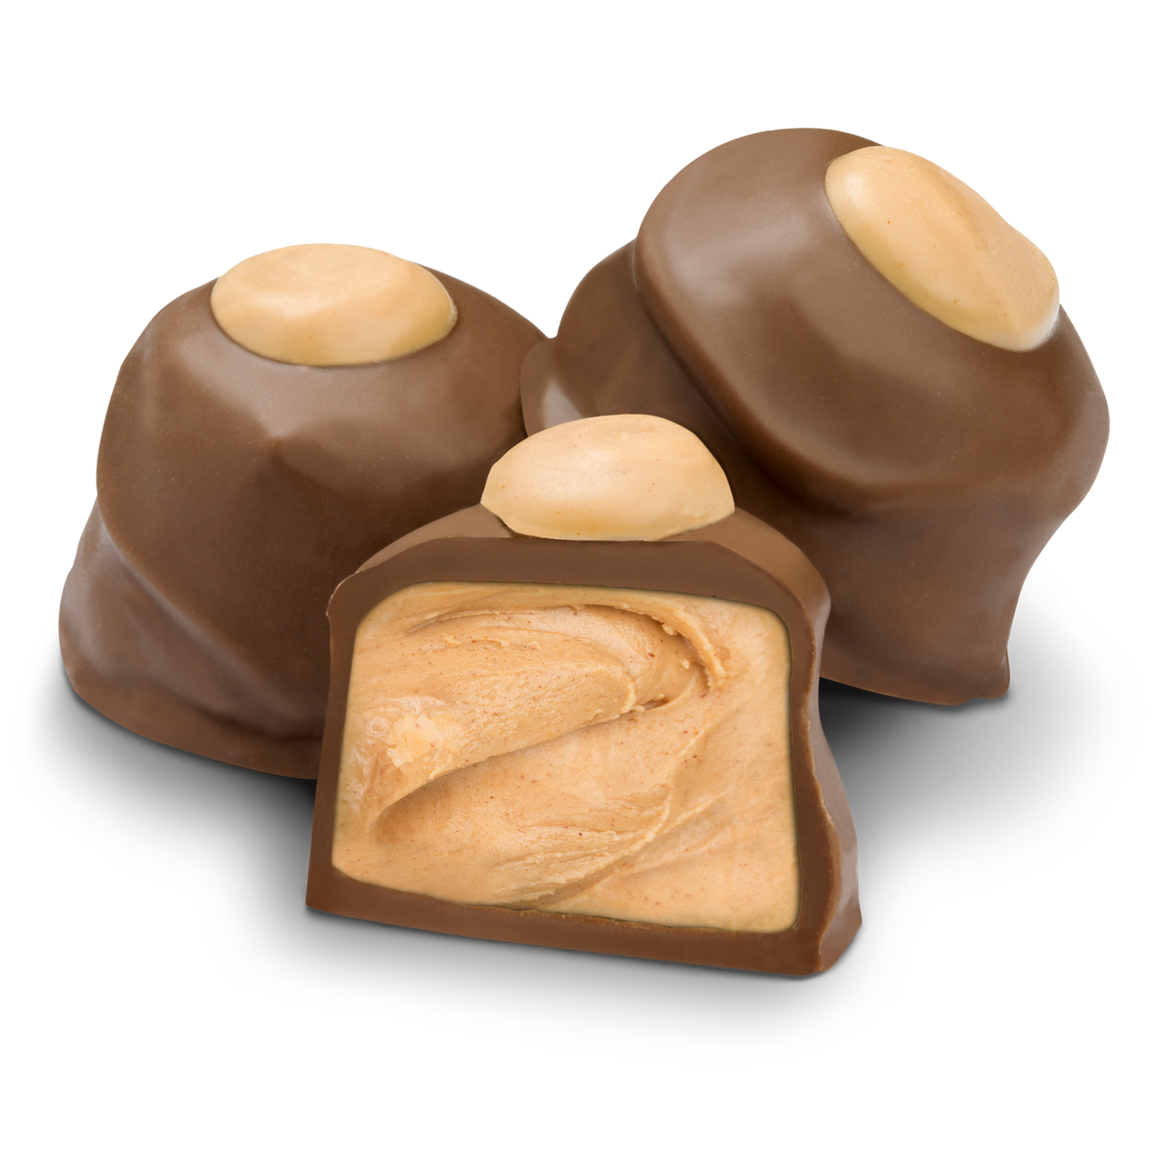 All City Candy Milk Chocolate Peanut Butter Buckeyes - 1 LB Box Chocolate Albanese Confectionery For fresh candy and great service, visit www.allcitycandy.com